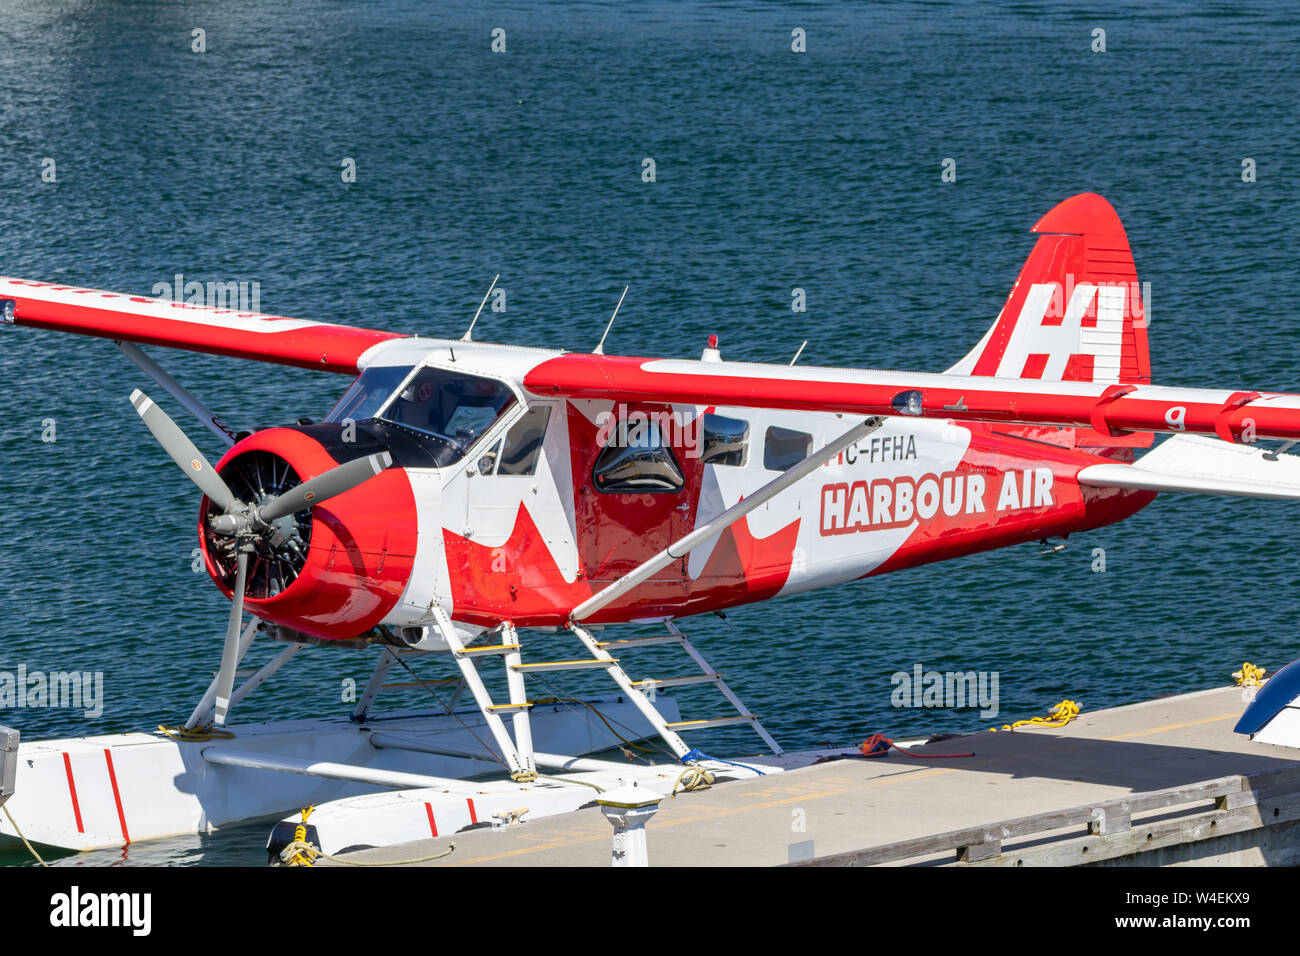 Canadian flag livery Harbour Air seaplane seen docked at Vancouver Flight Centre - Harbour Airport. Stock Photo